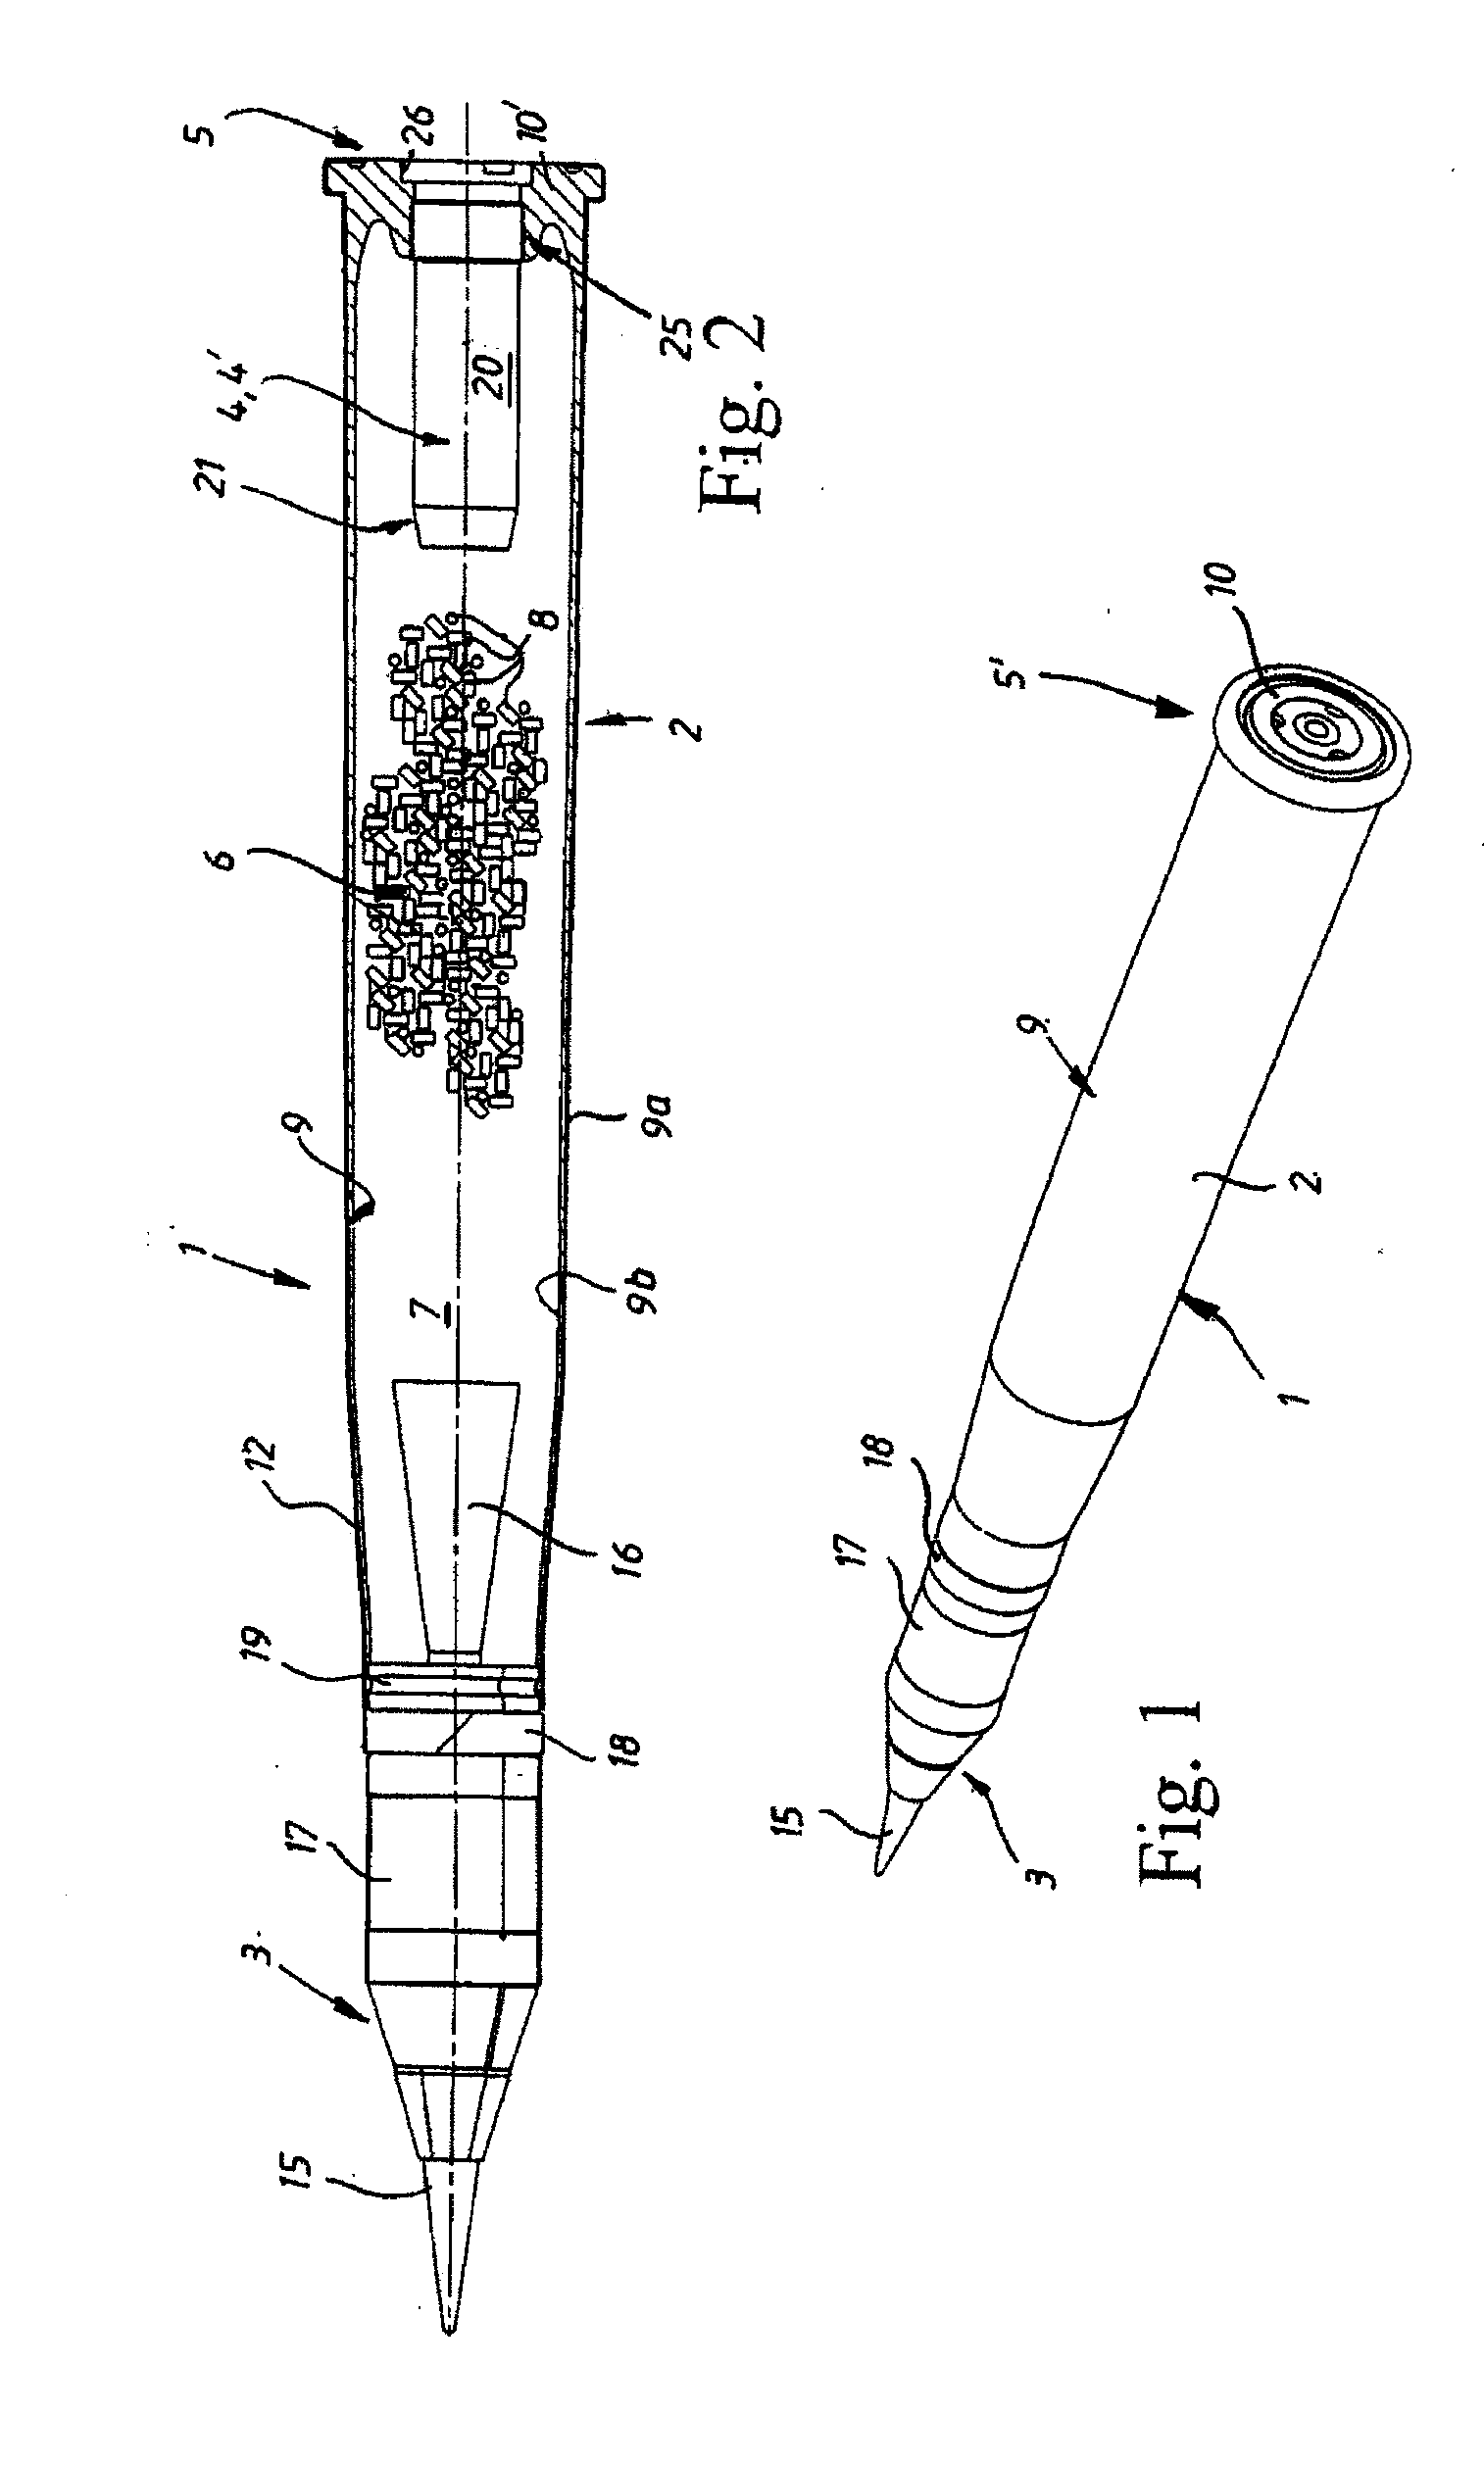 Plasma generator for an electrothermal-chemical weapons system comprising ceramic, method of fixing the ceramic in the plasma generator and ammunition round comprising such a plasma generator